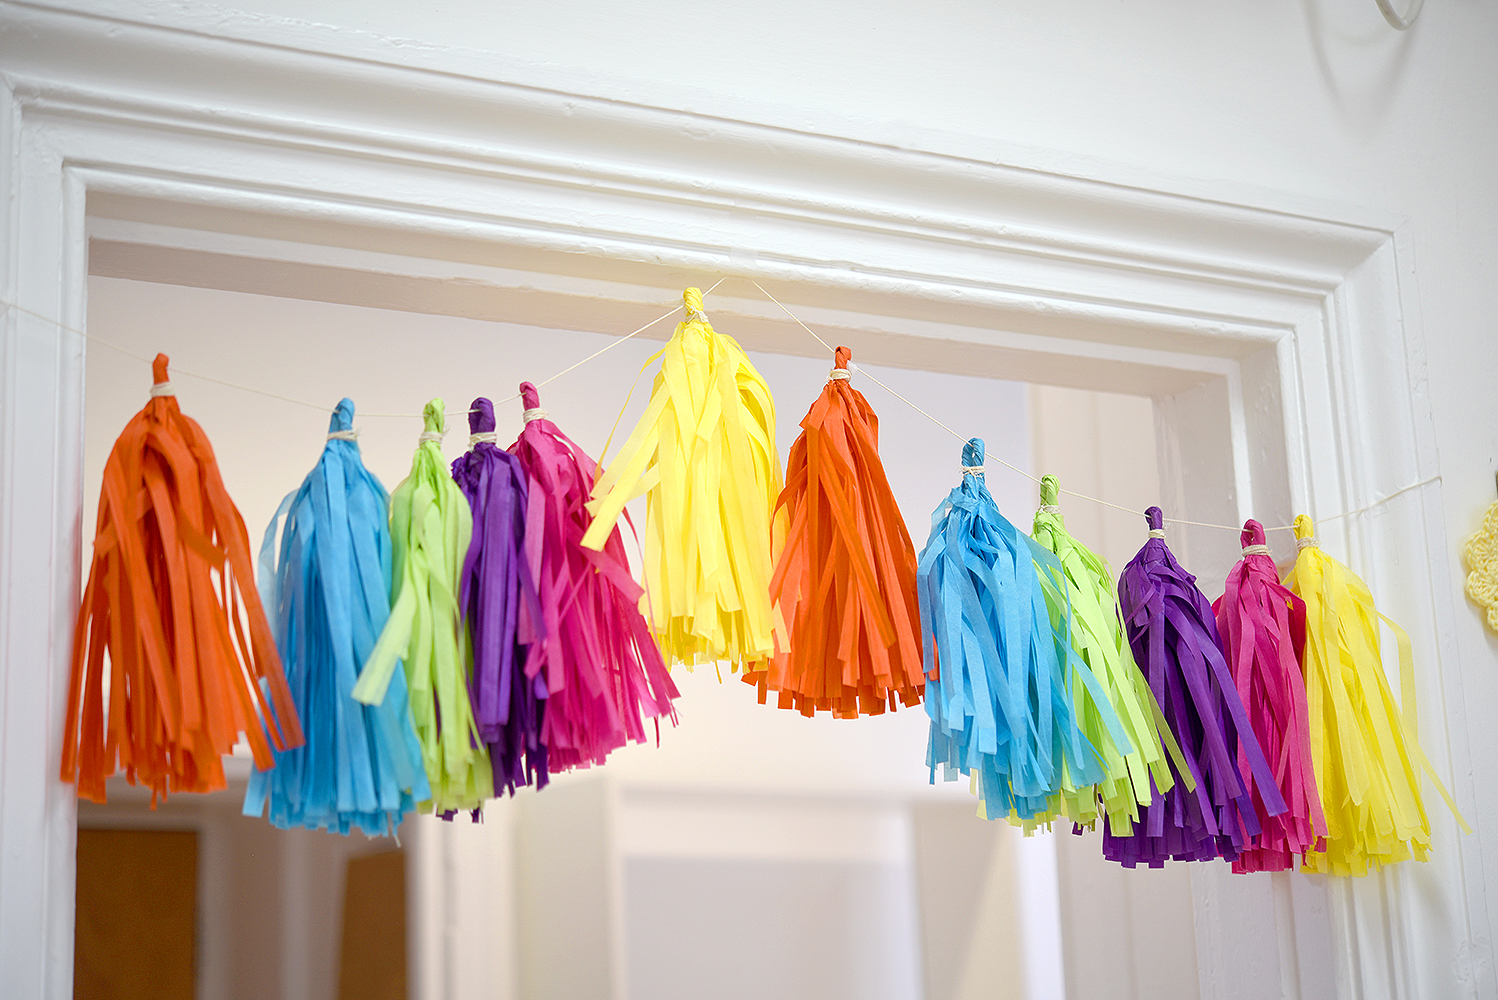 Multi-coloured Handmade Paper Tassels hanging above the door at Tea and Crafting's new workshop space